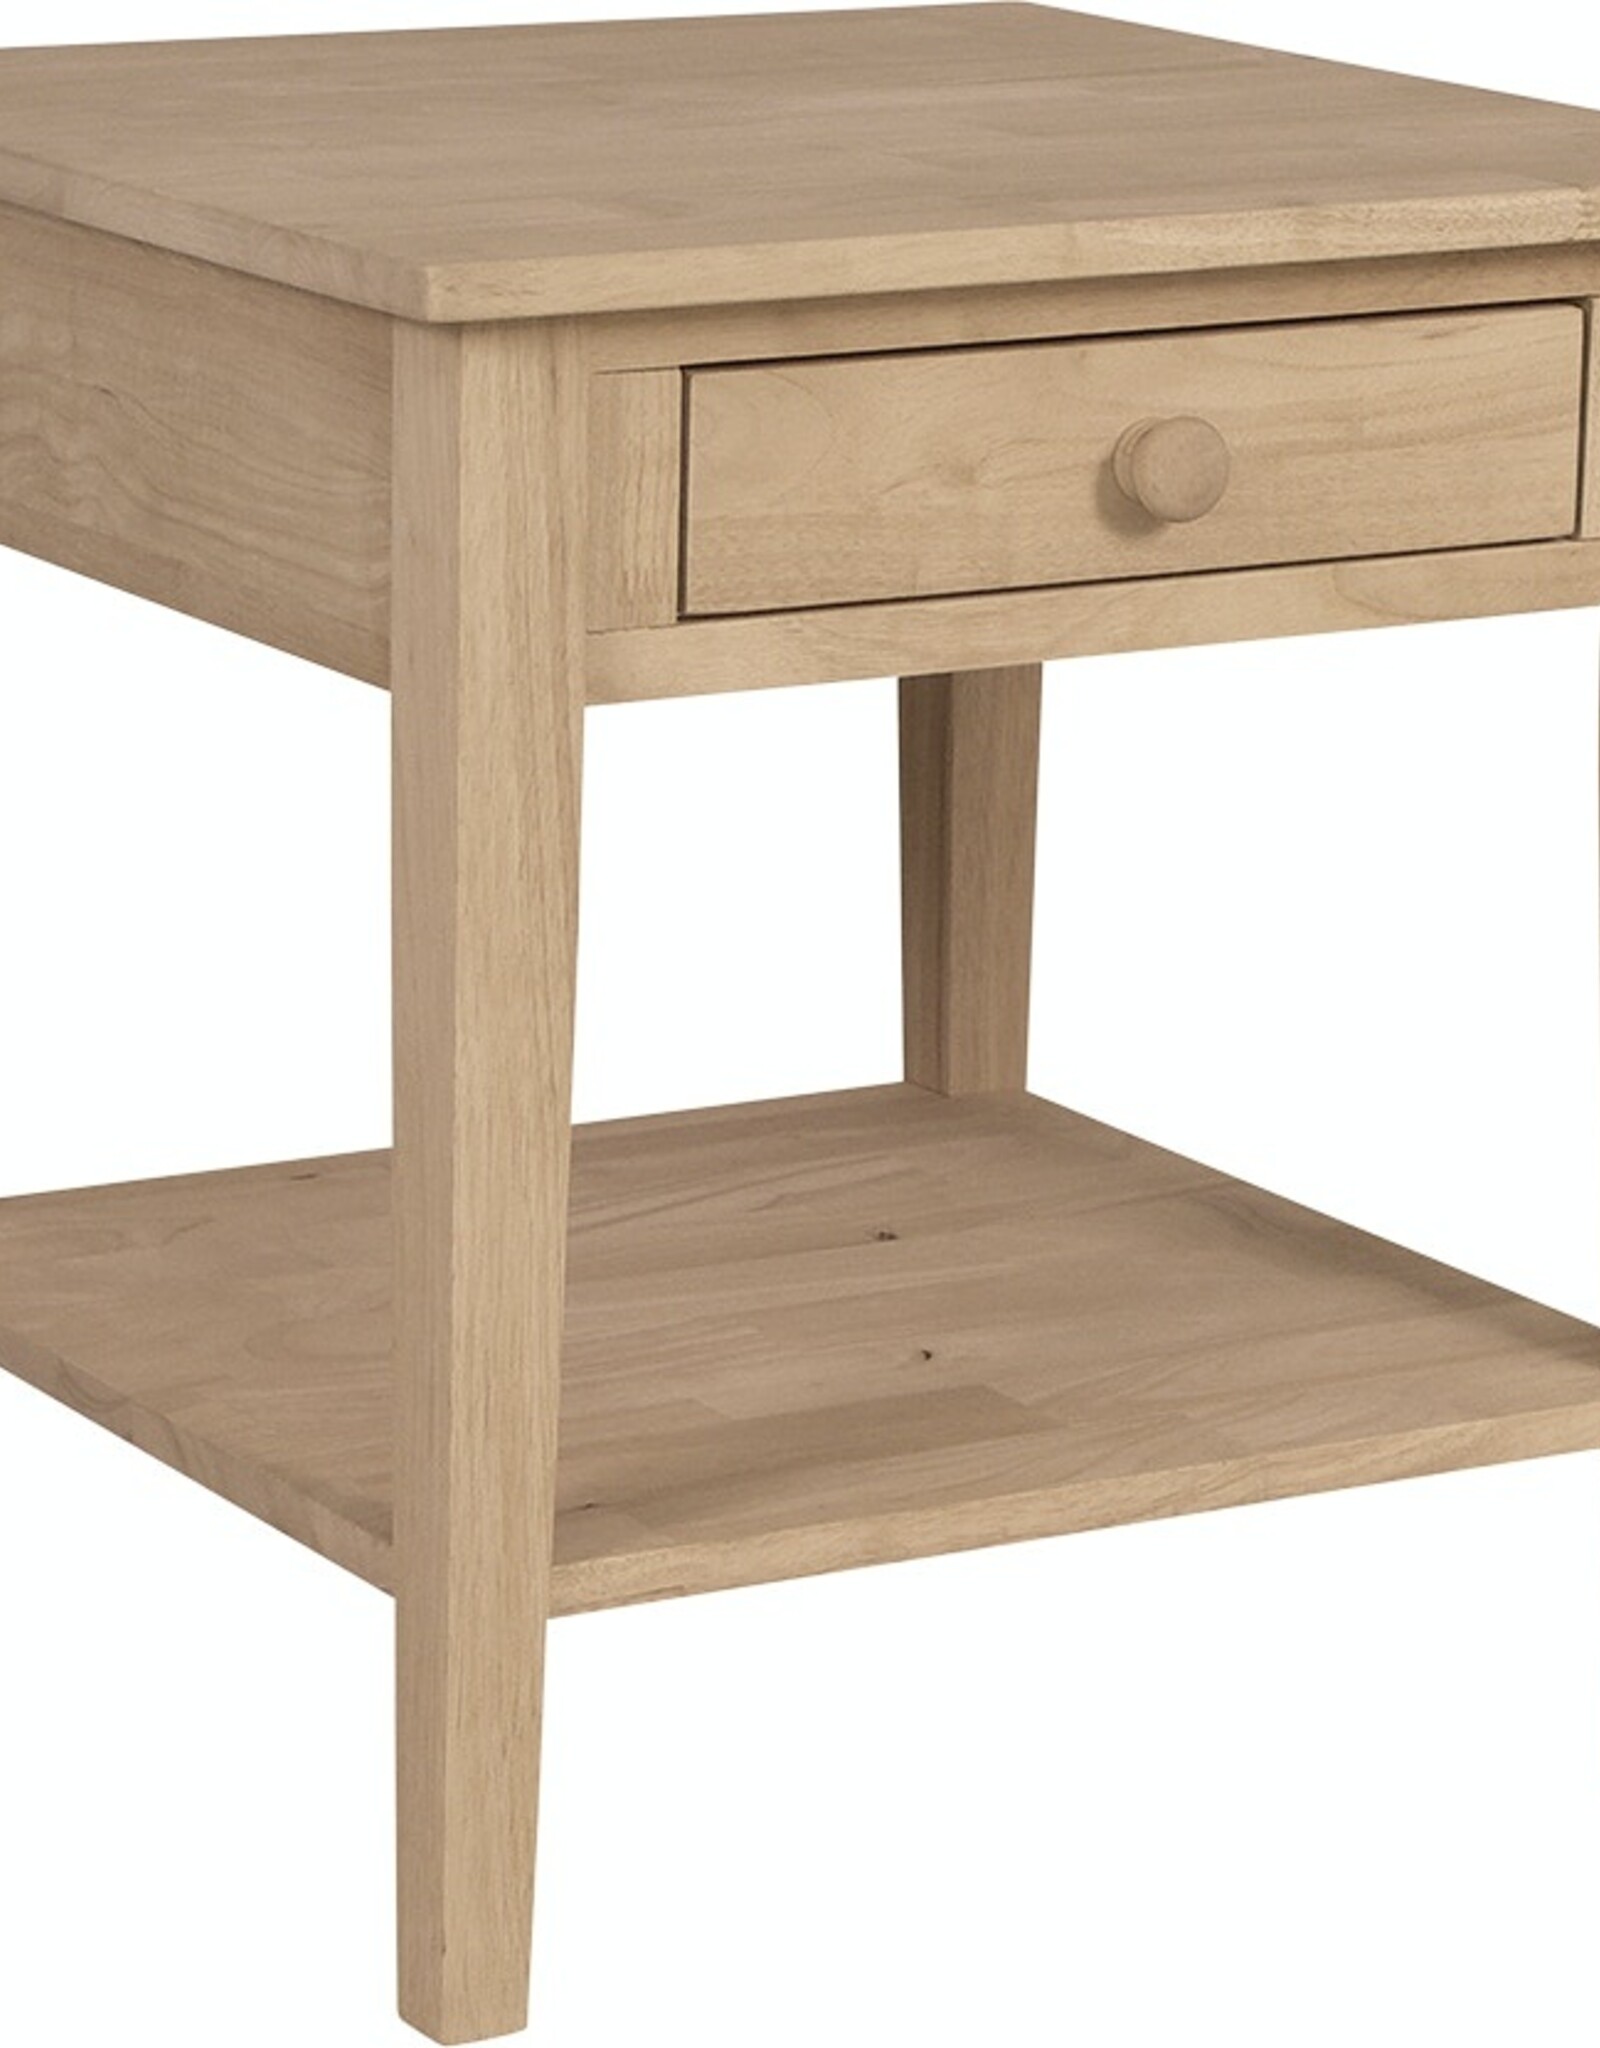 Whitewood Destinations Spencer End Table 24" square (Specify Color)